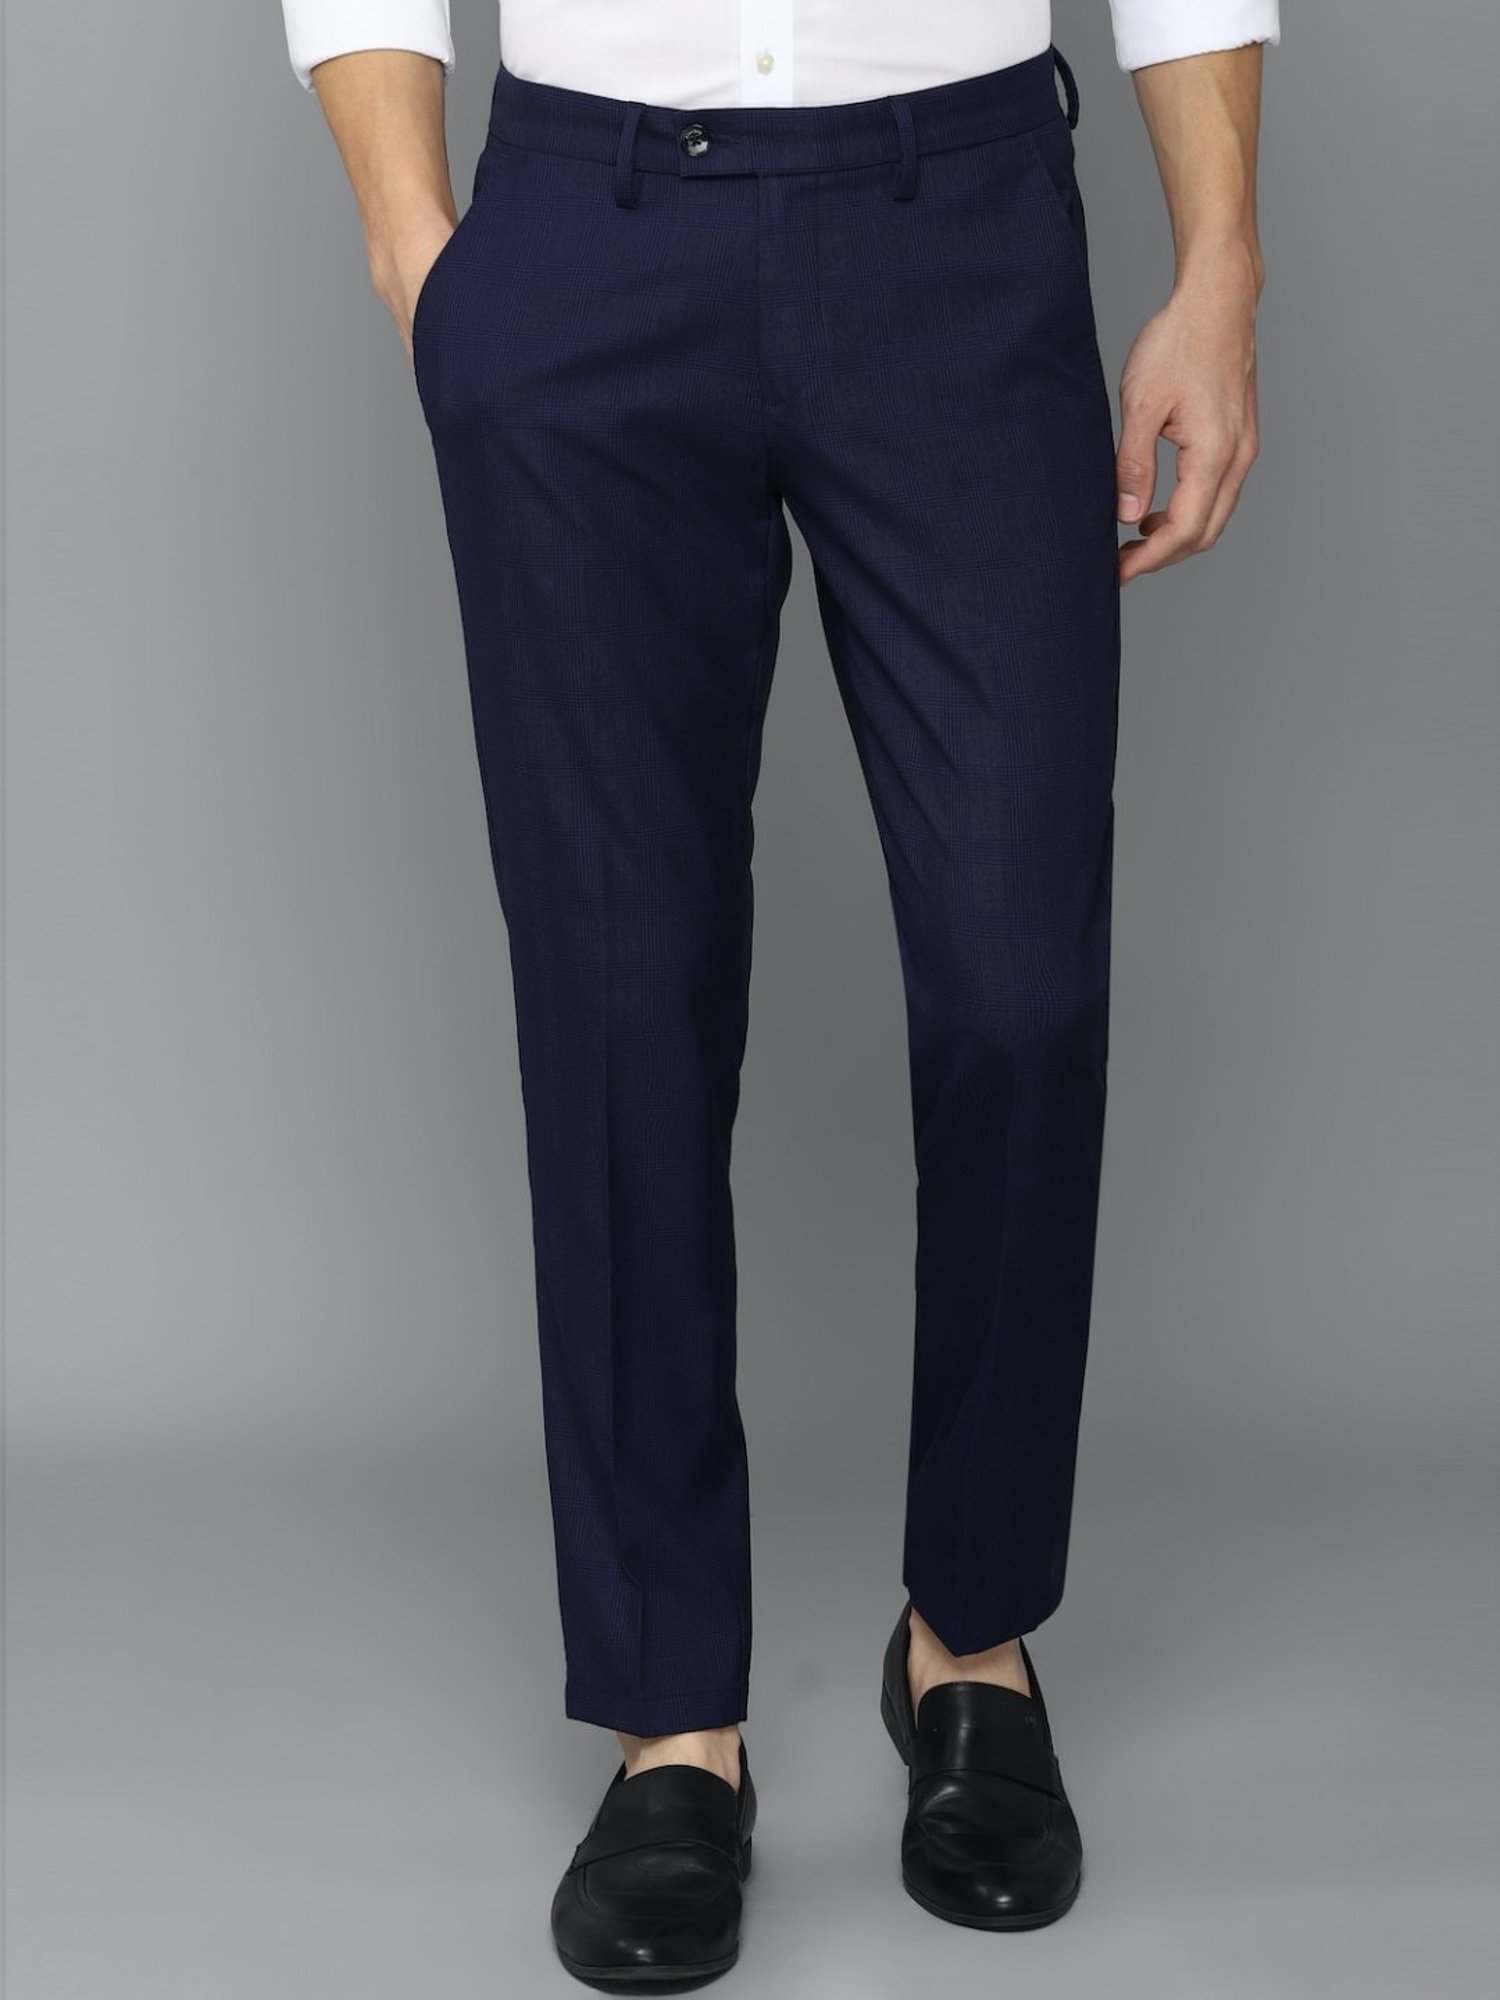 Slim Straight Trousers  Buy Slim Straight Trousers online in India